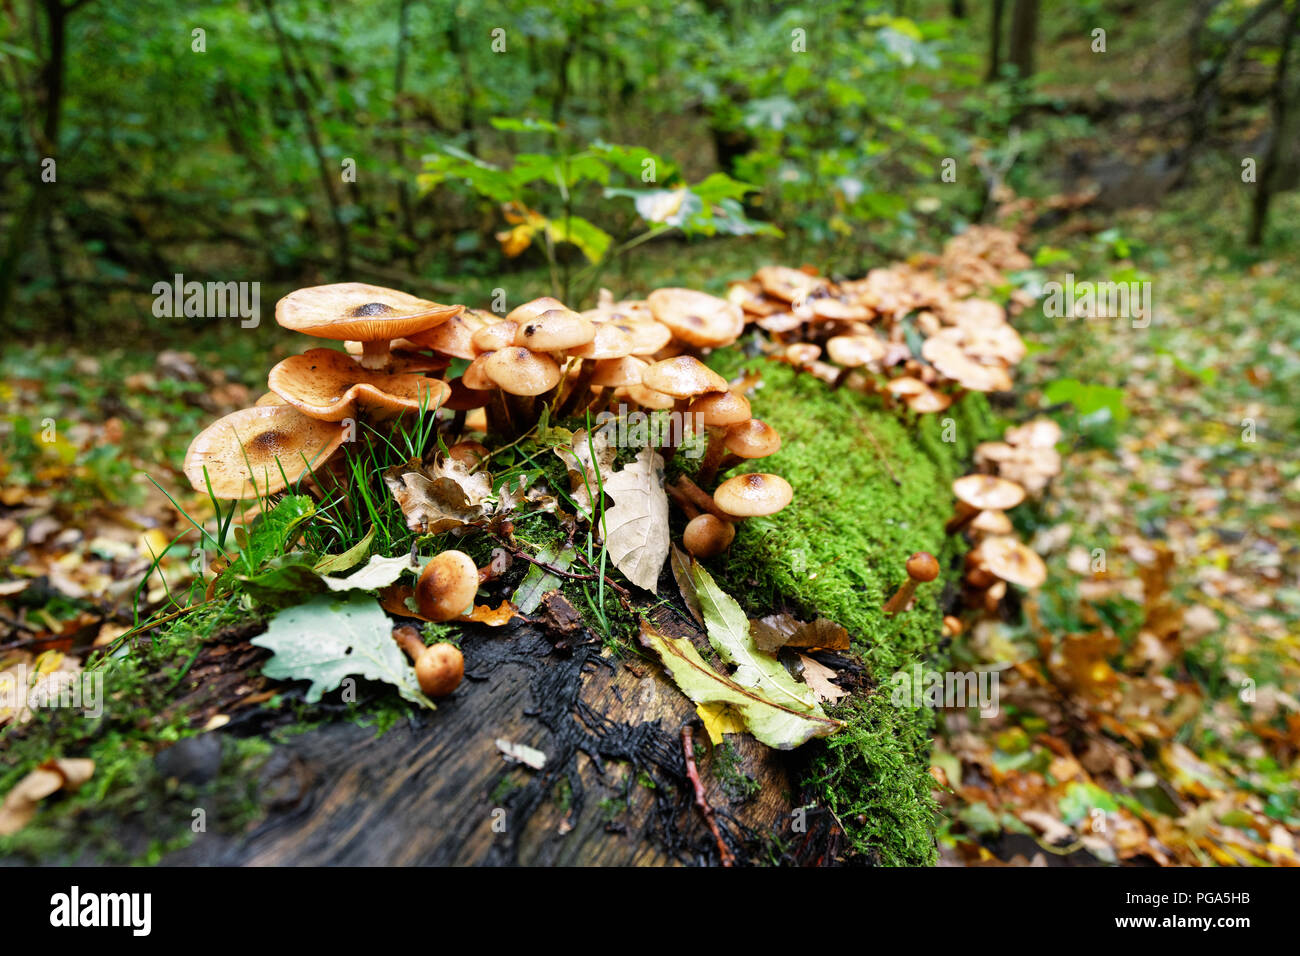 Autumn mood in the forest - A fallen tree is densely overgrown with mushrooms and moss, background blur Stock Photo